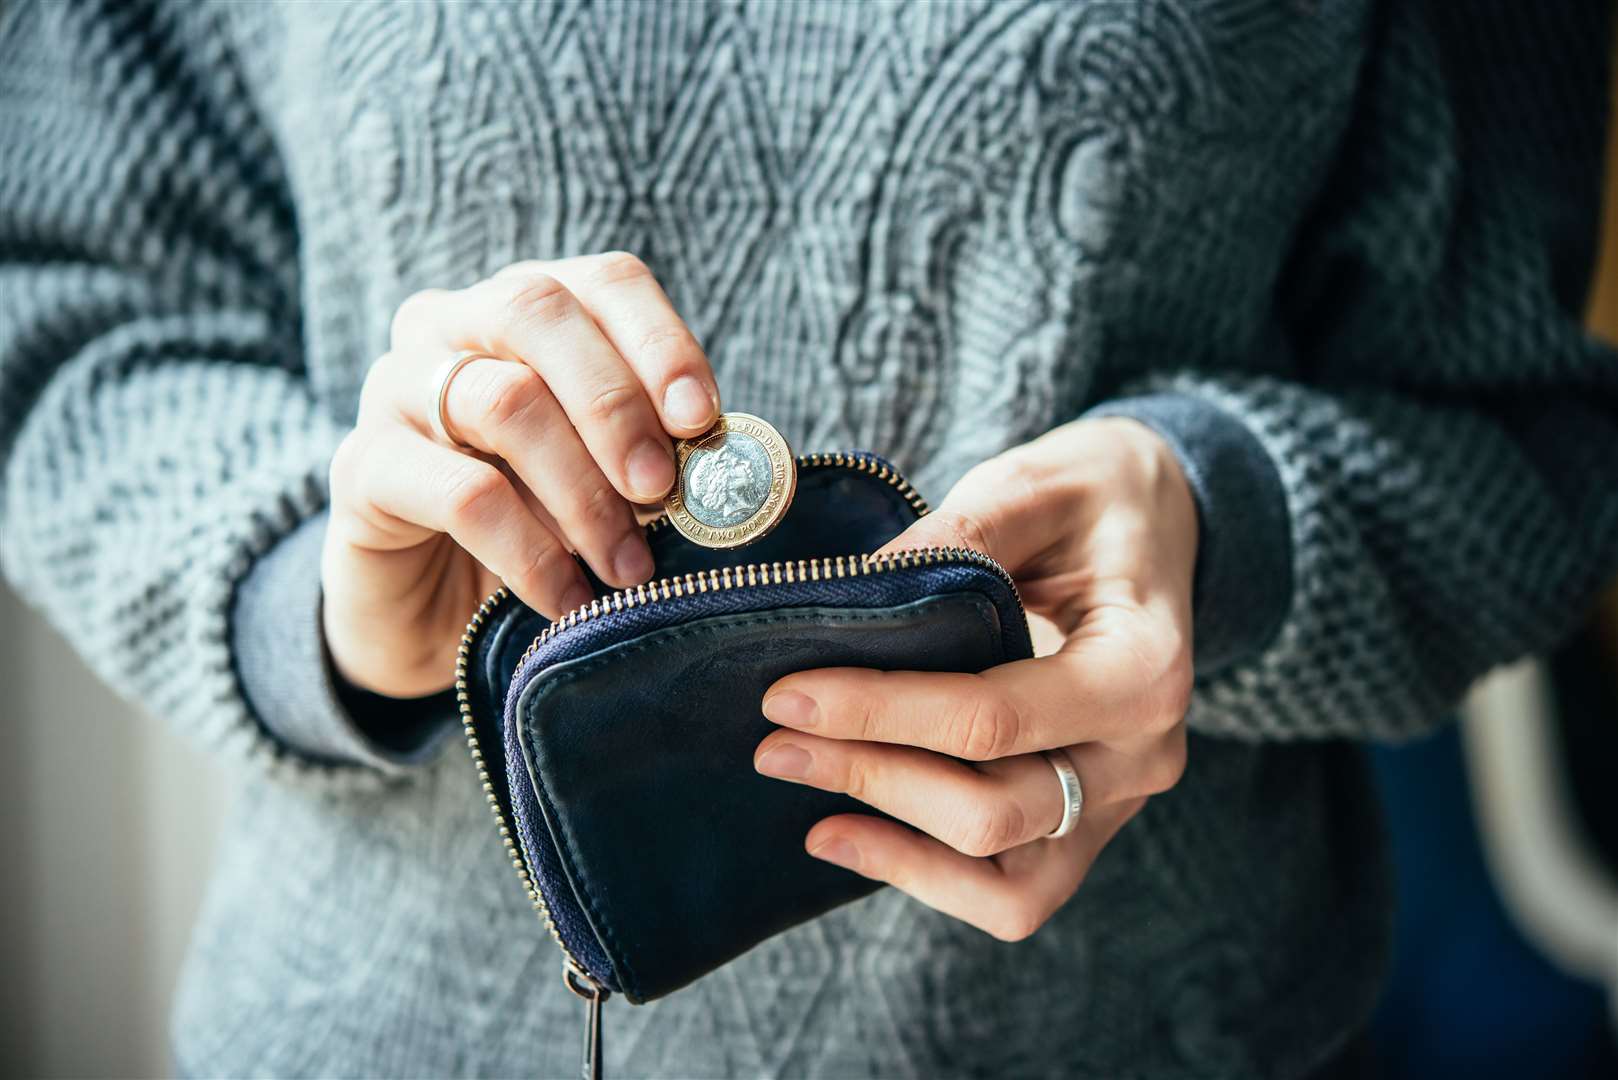 Have you got rare coins in purses and piggy banks? Image: Stock photo.